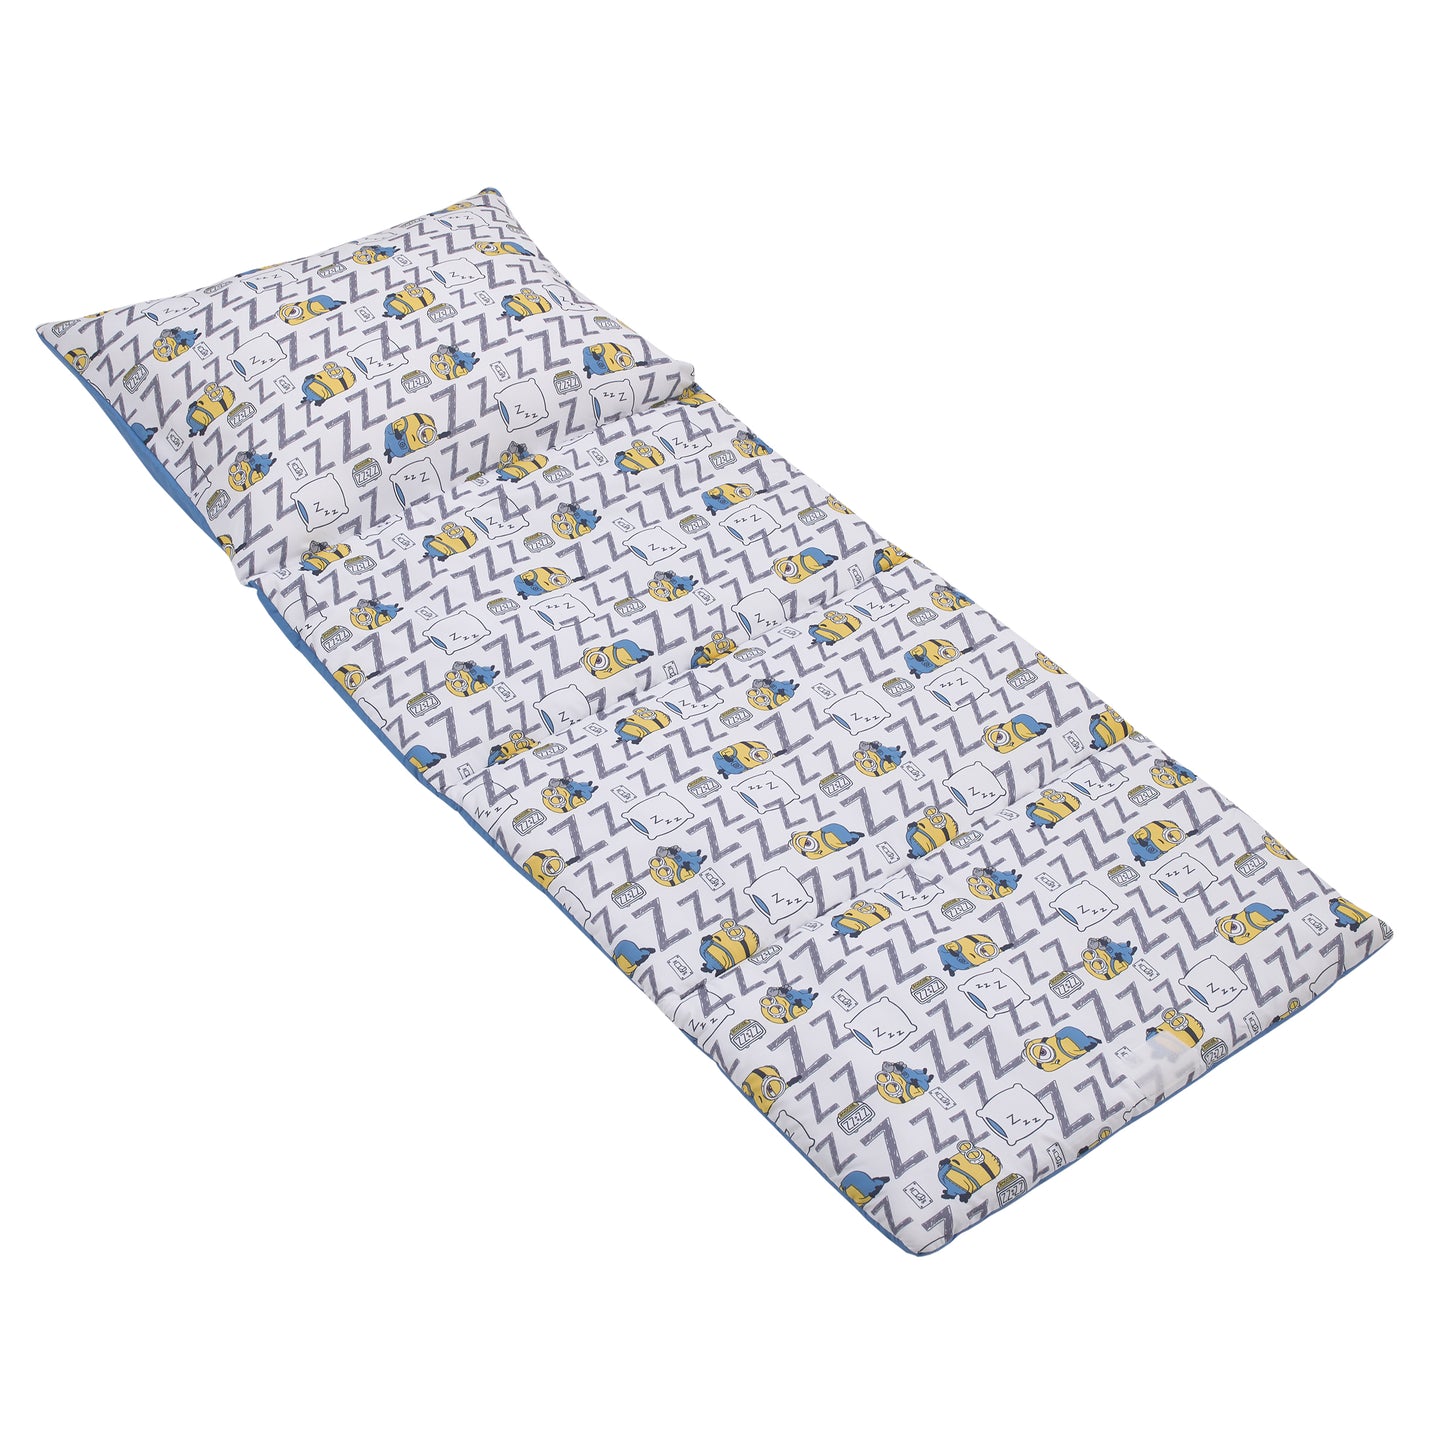 Illumination Lazy Minions Club Gray, Blue, Yellow, and White Deluxe Easy Fold Toddler Nap Mat